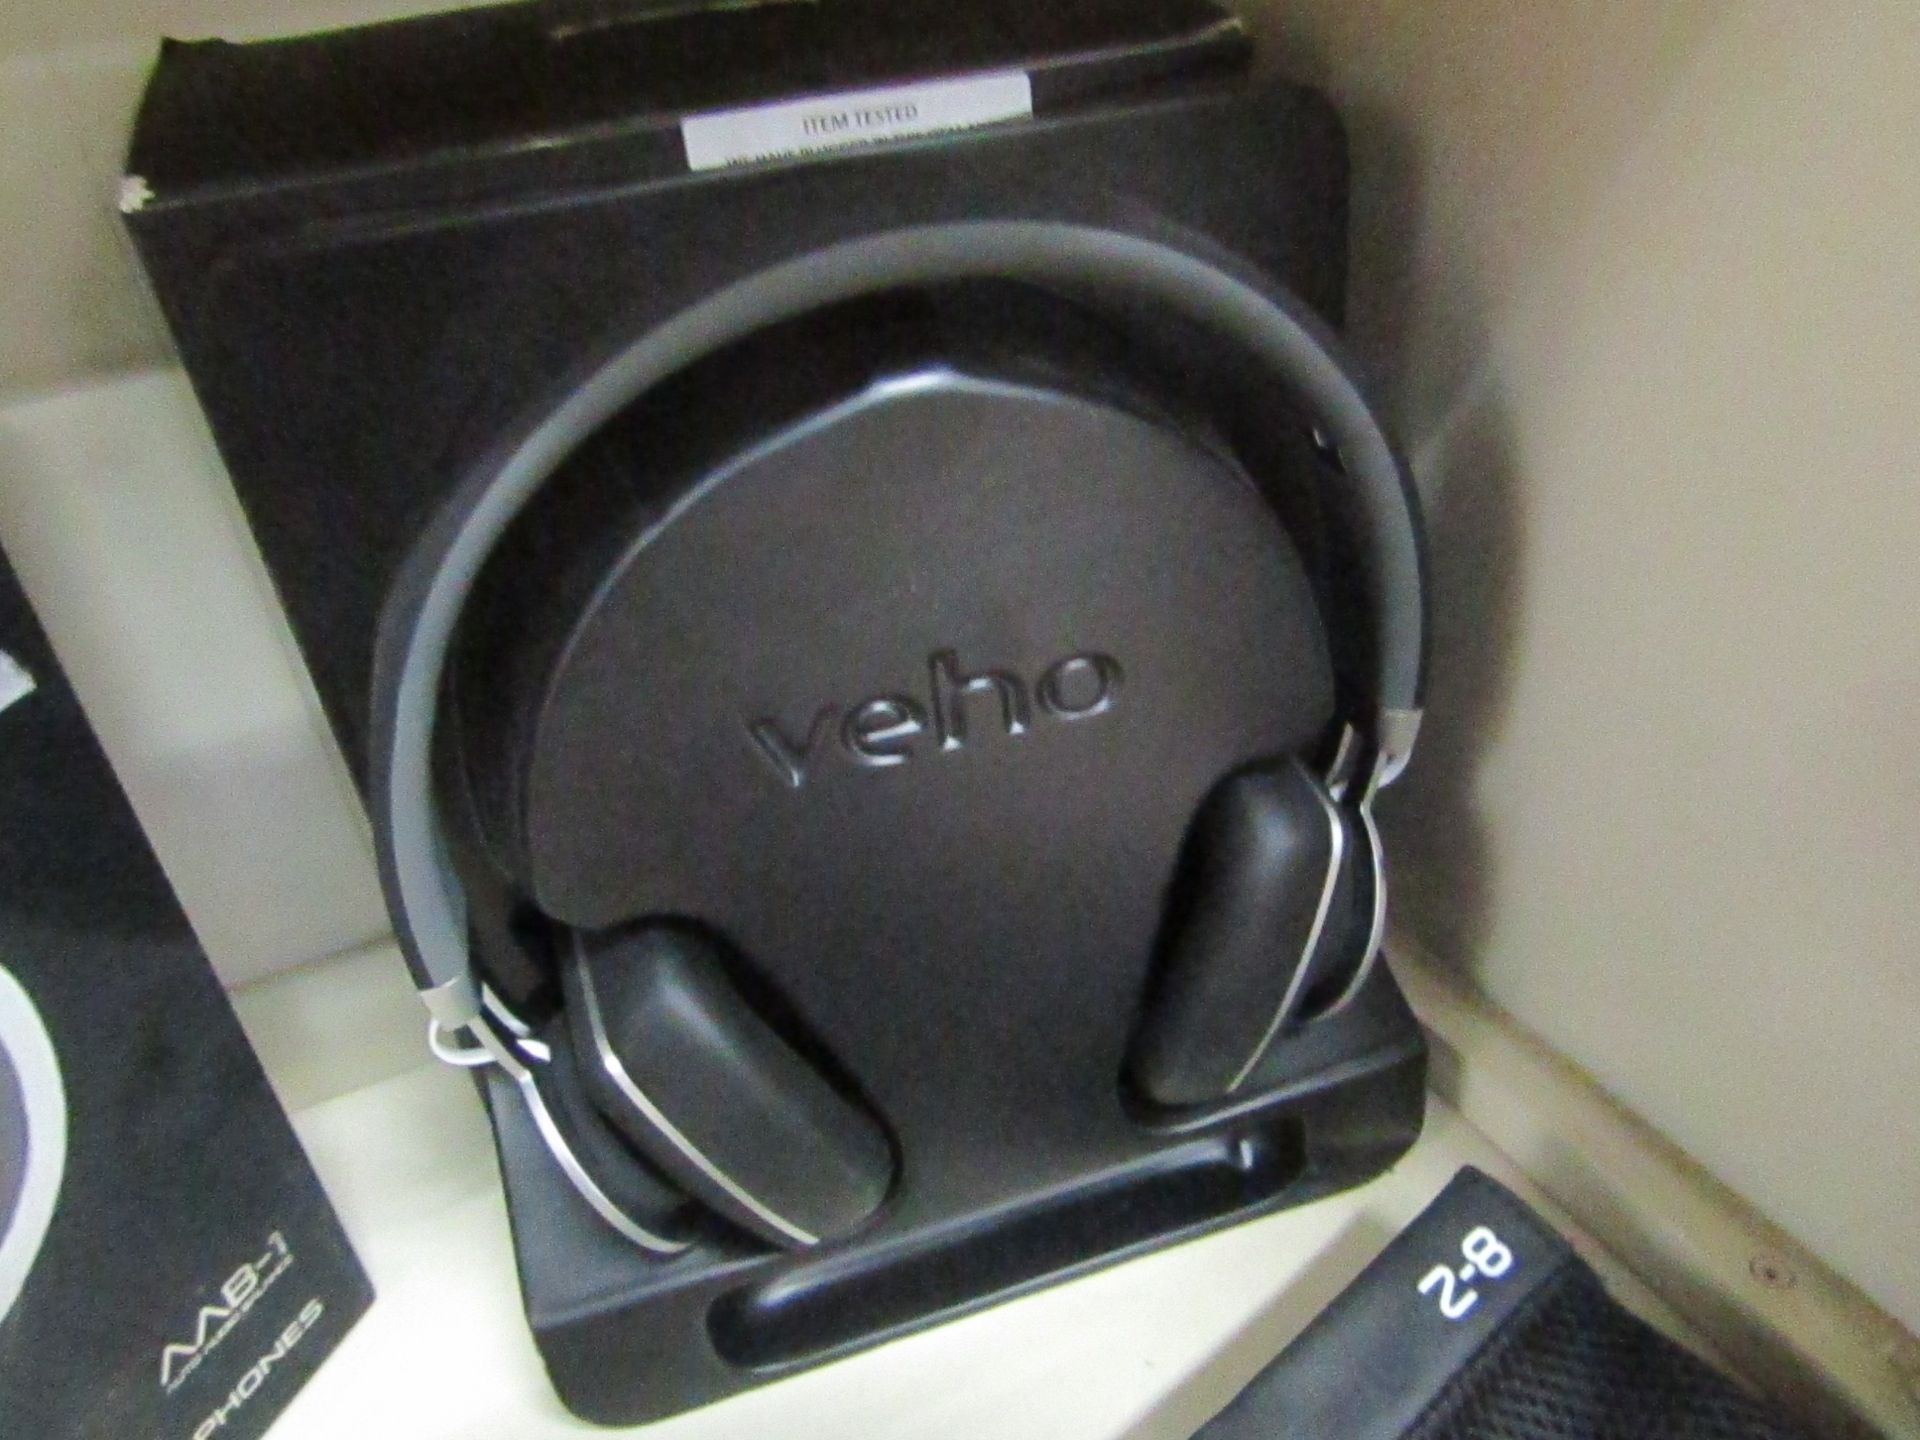 Veho 2.8 headphones, tested working and boxed.